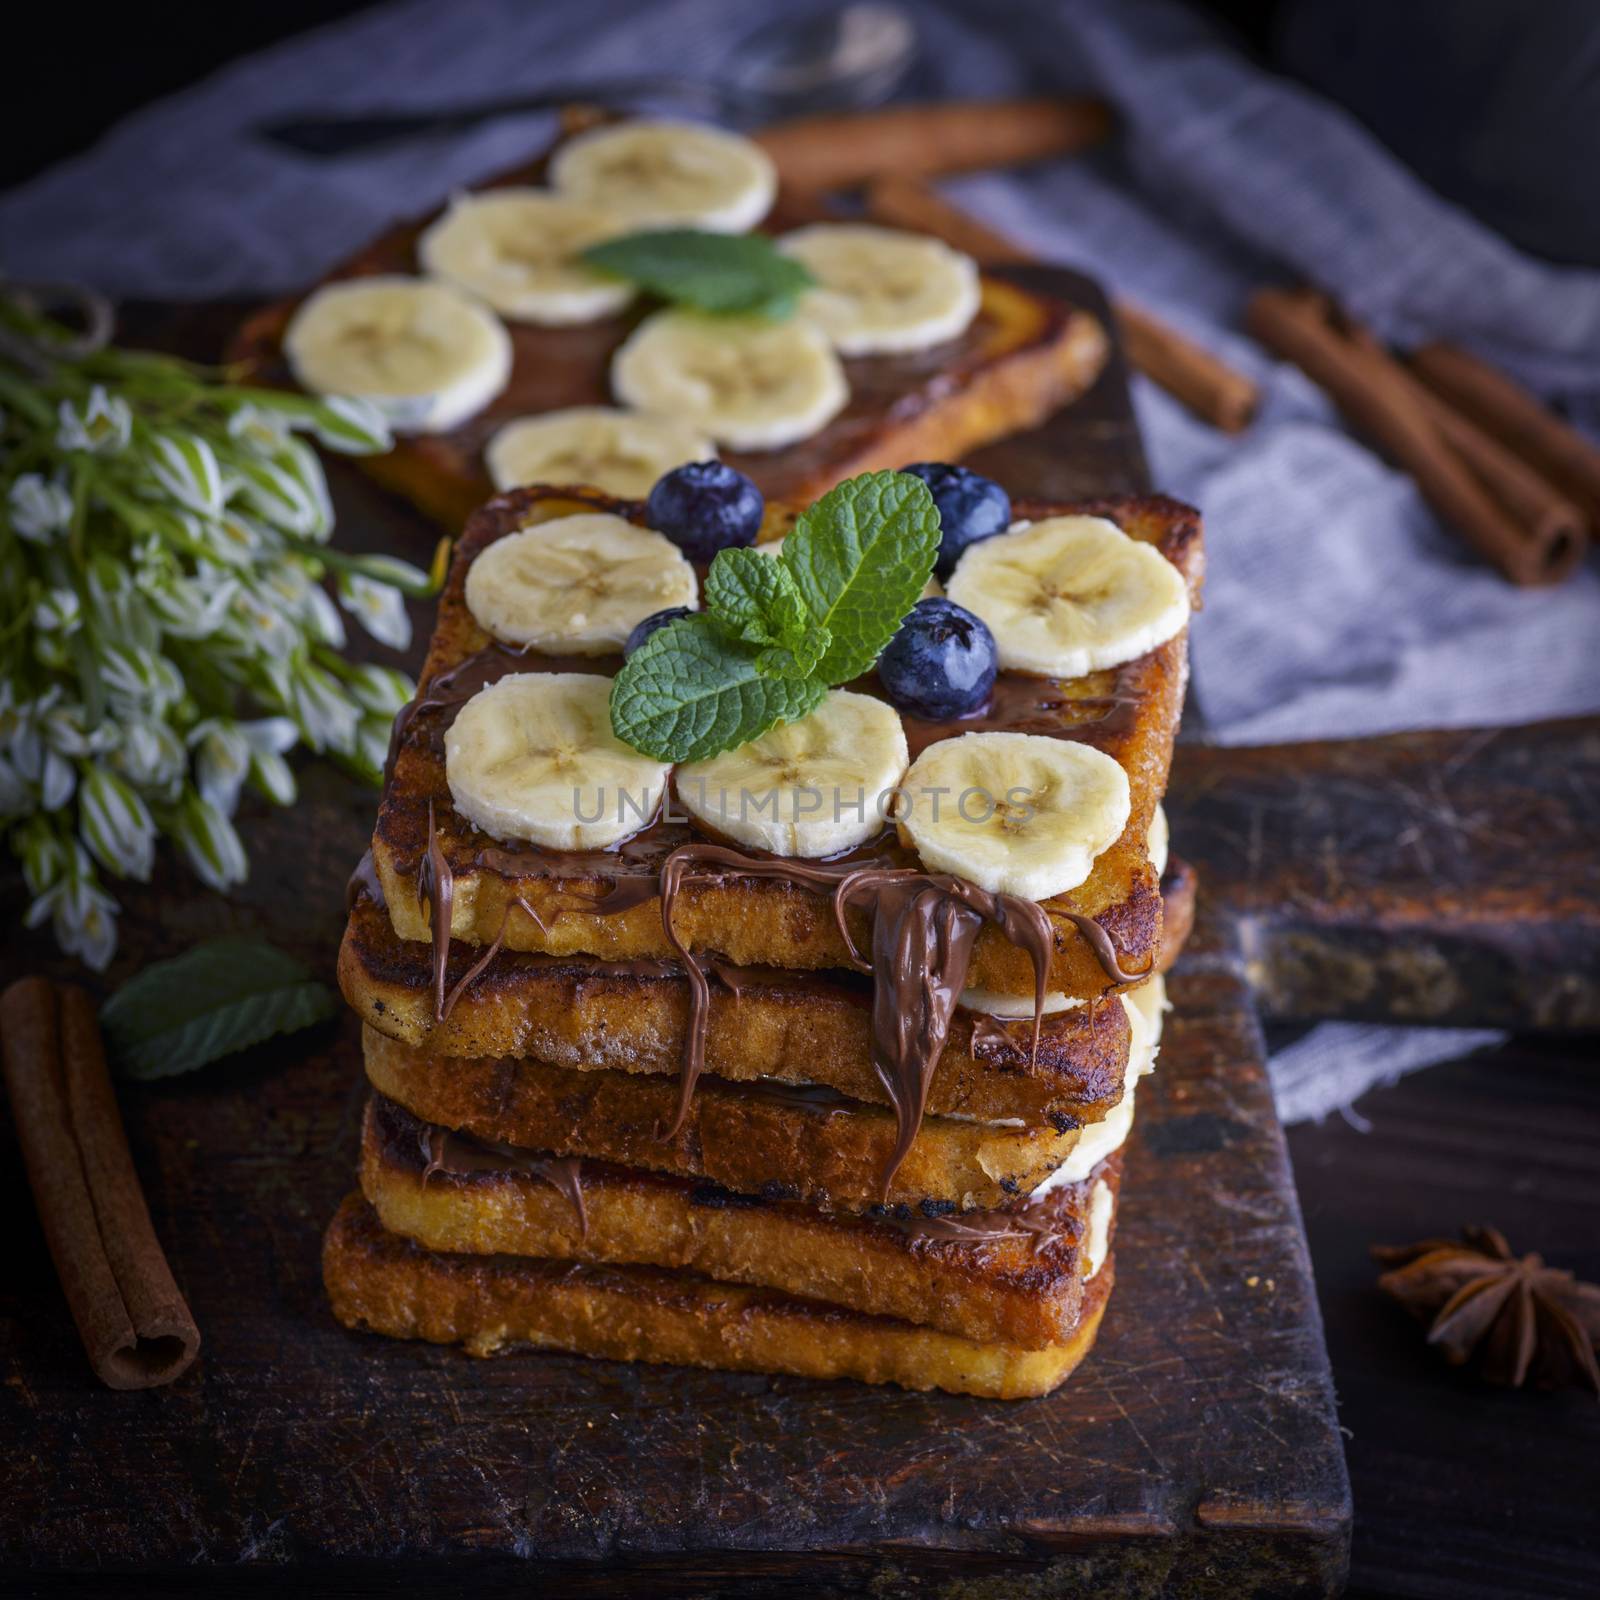 a pile of square fried bread slices with chocolate and banana slices on a brown wooden board, French toast for breakfast